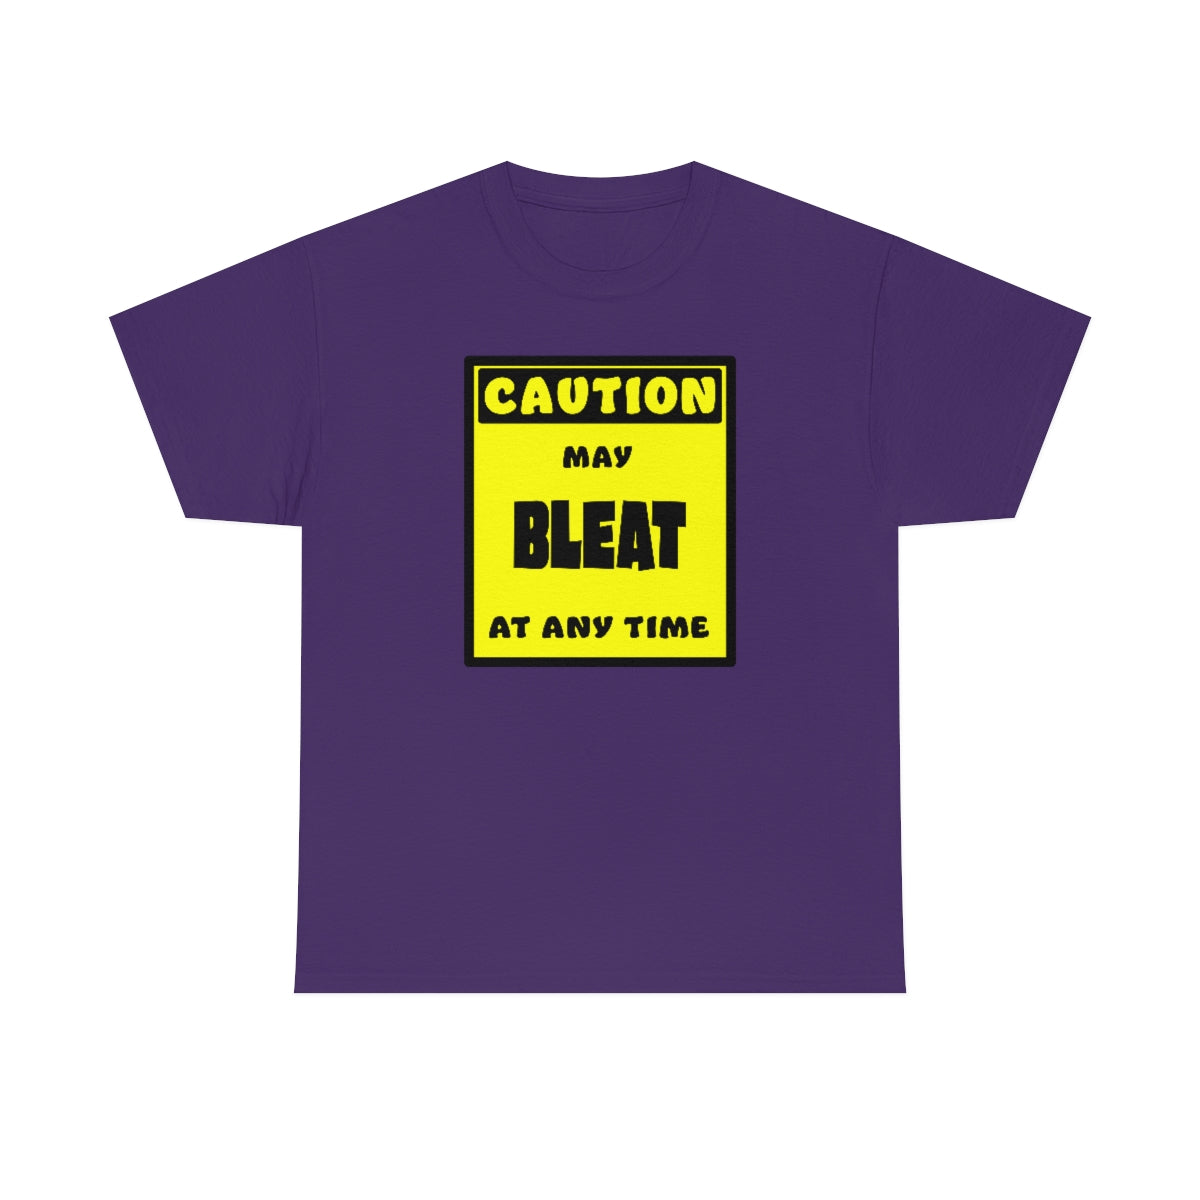 CAUTION! May BLEAT at any time! - T-Shirt T-Shirt AFLT-Whootorca Purple S 